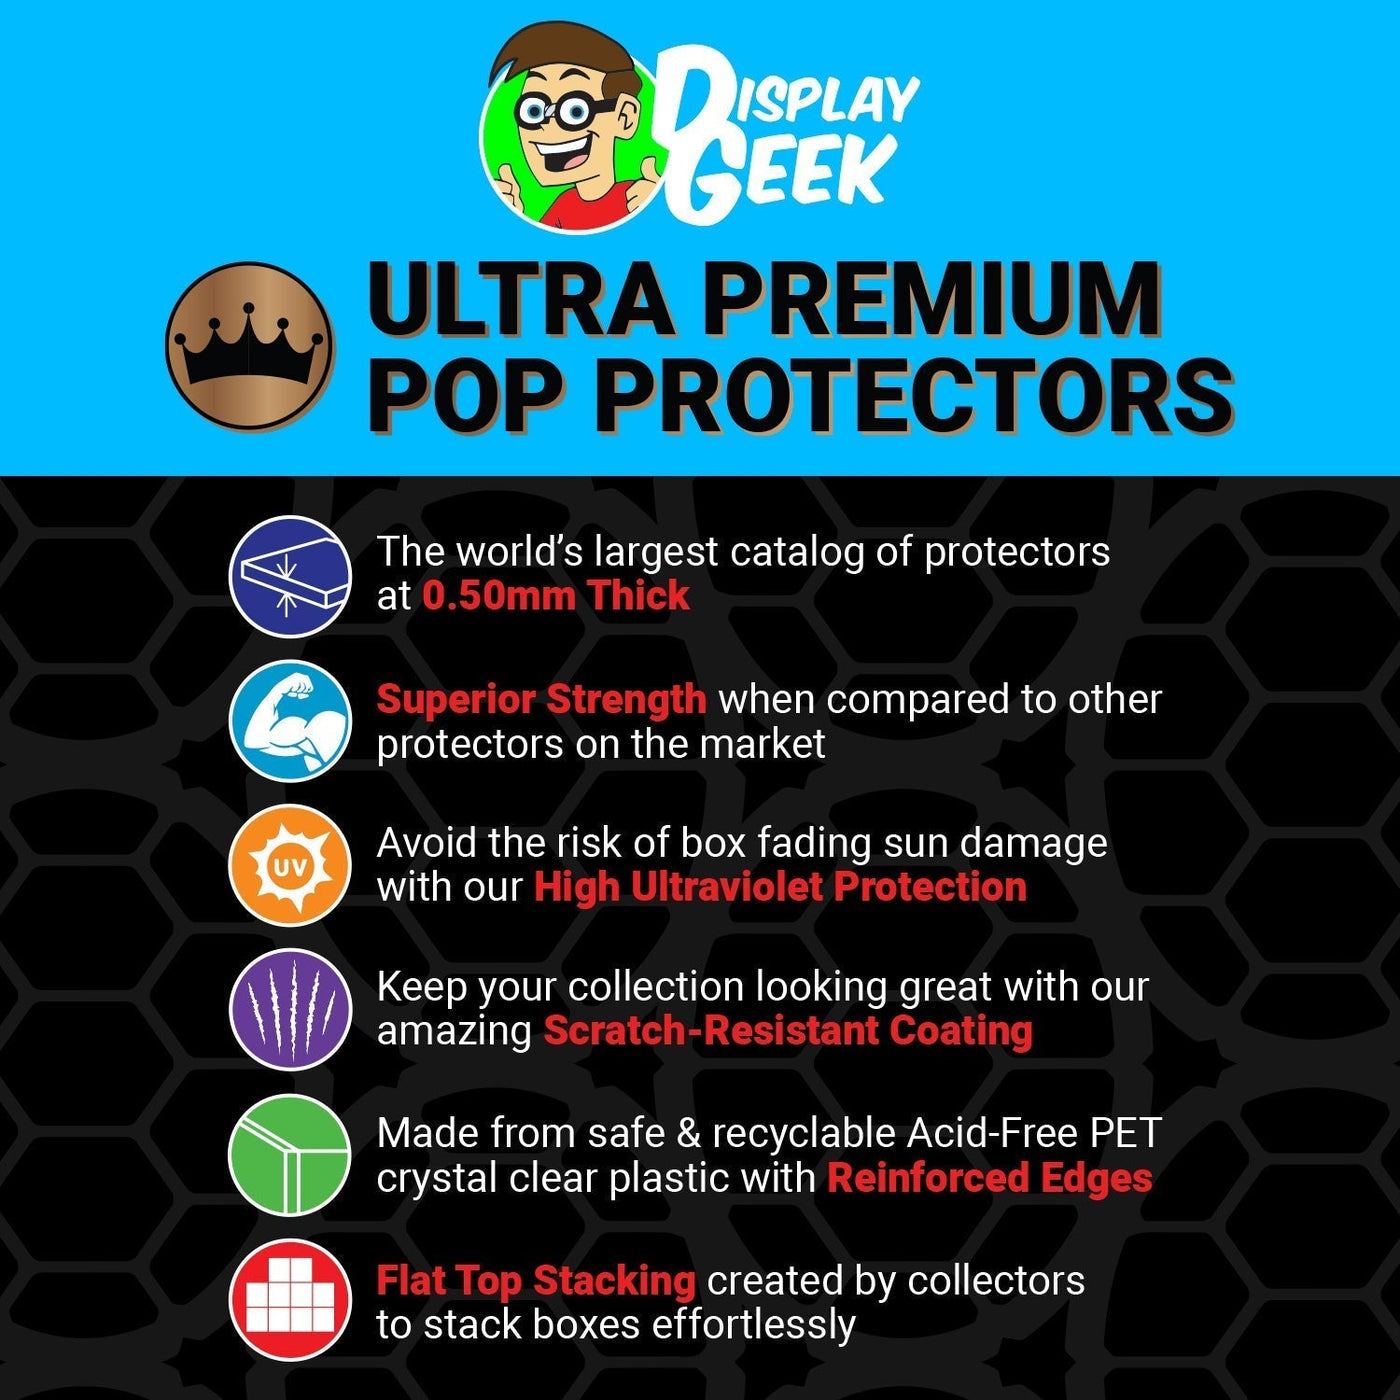 Pop Protector for 3 Pack The Creators NYCC Funko Pop on The Protector Guide App by Display Geek